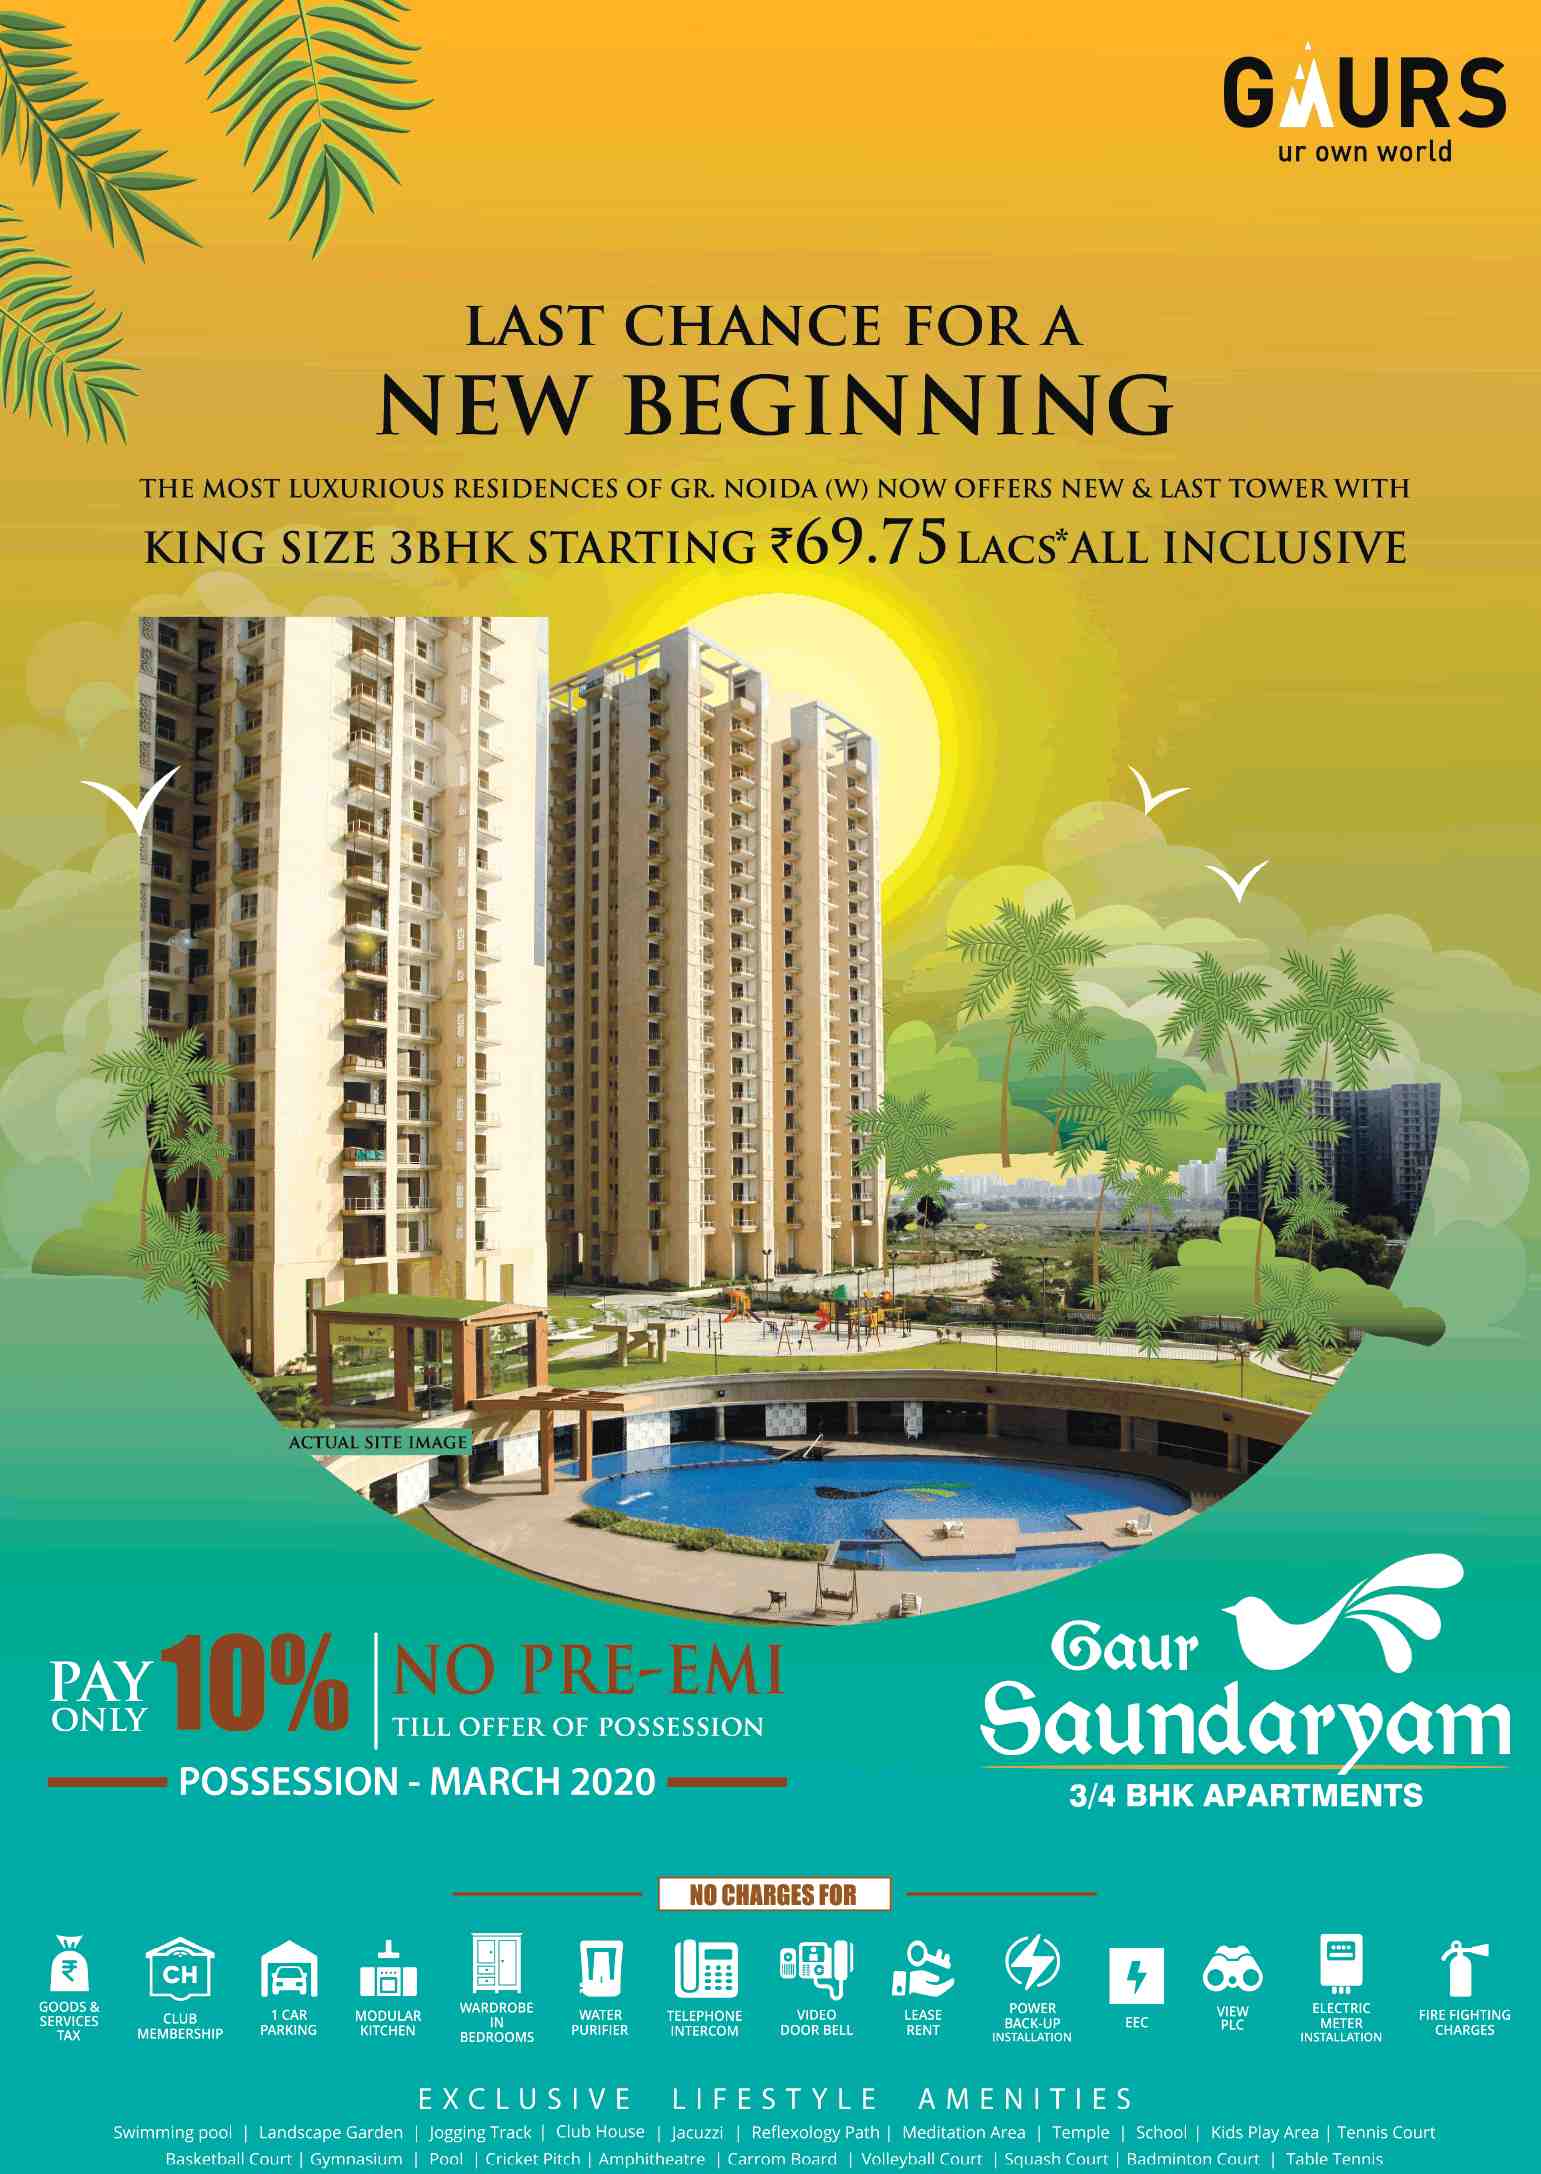 Pay only 10% and no pre-EMI till possession at Gaur Saundaryam in Greater Noida